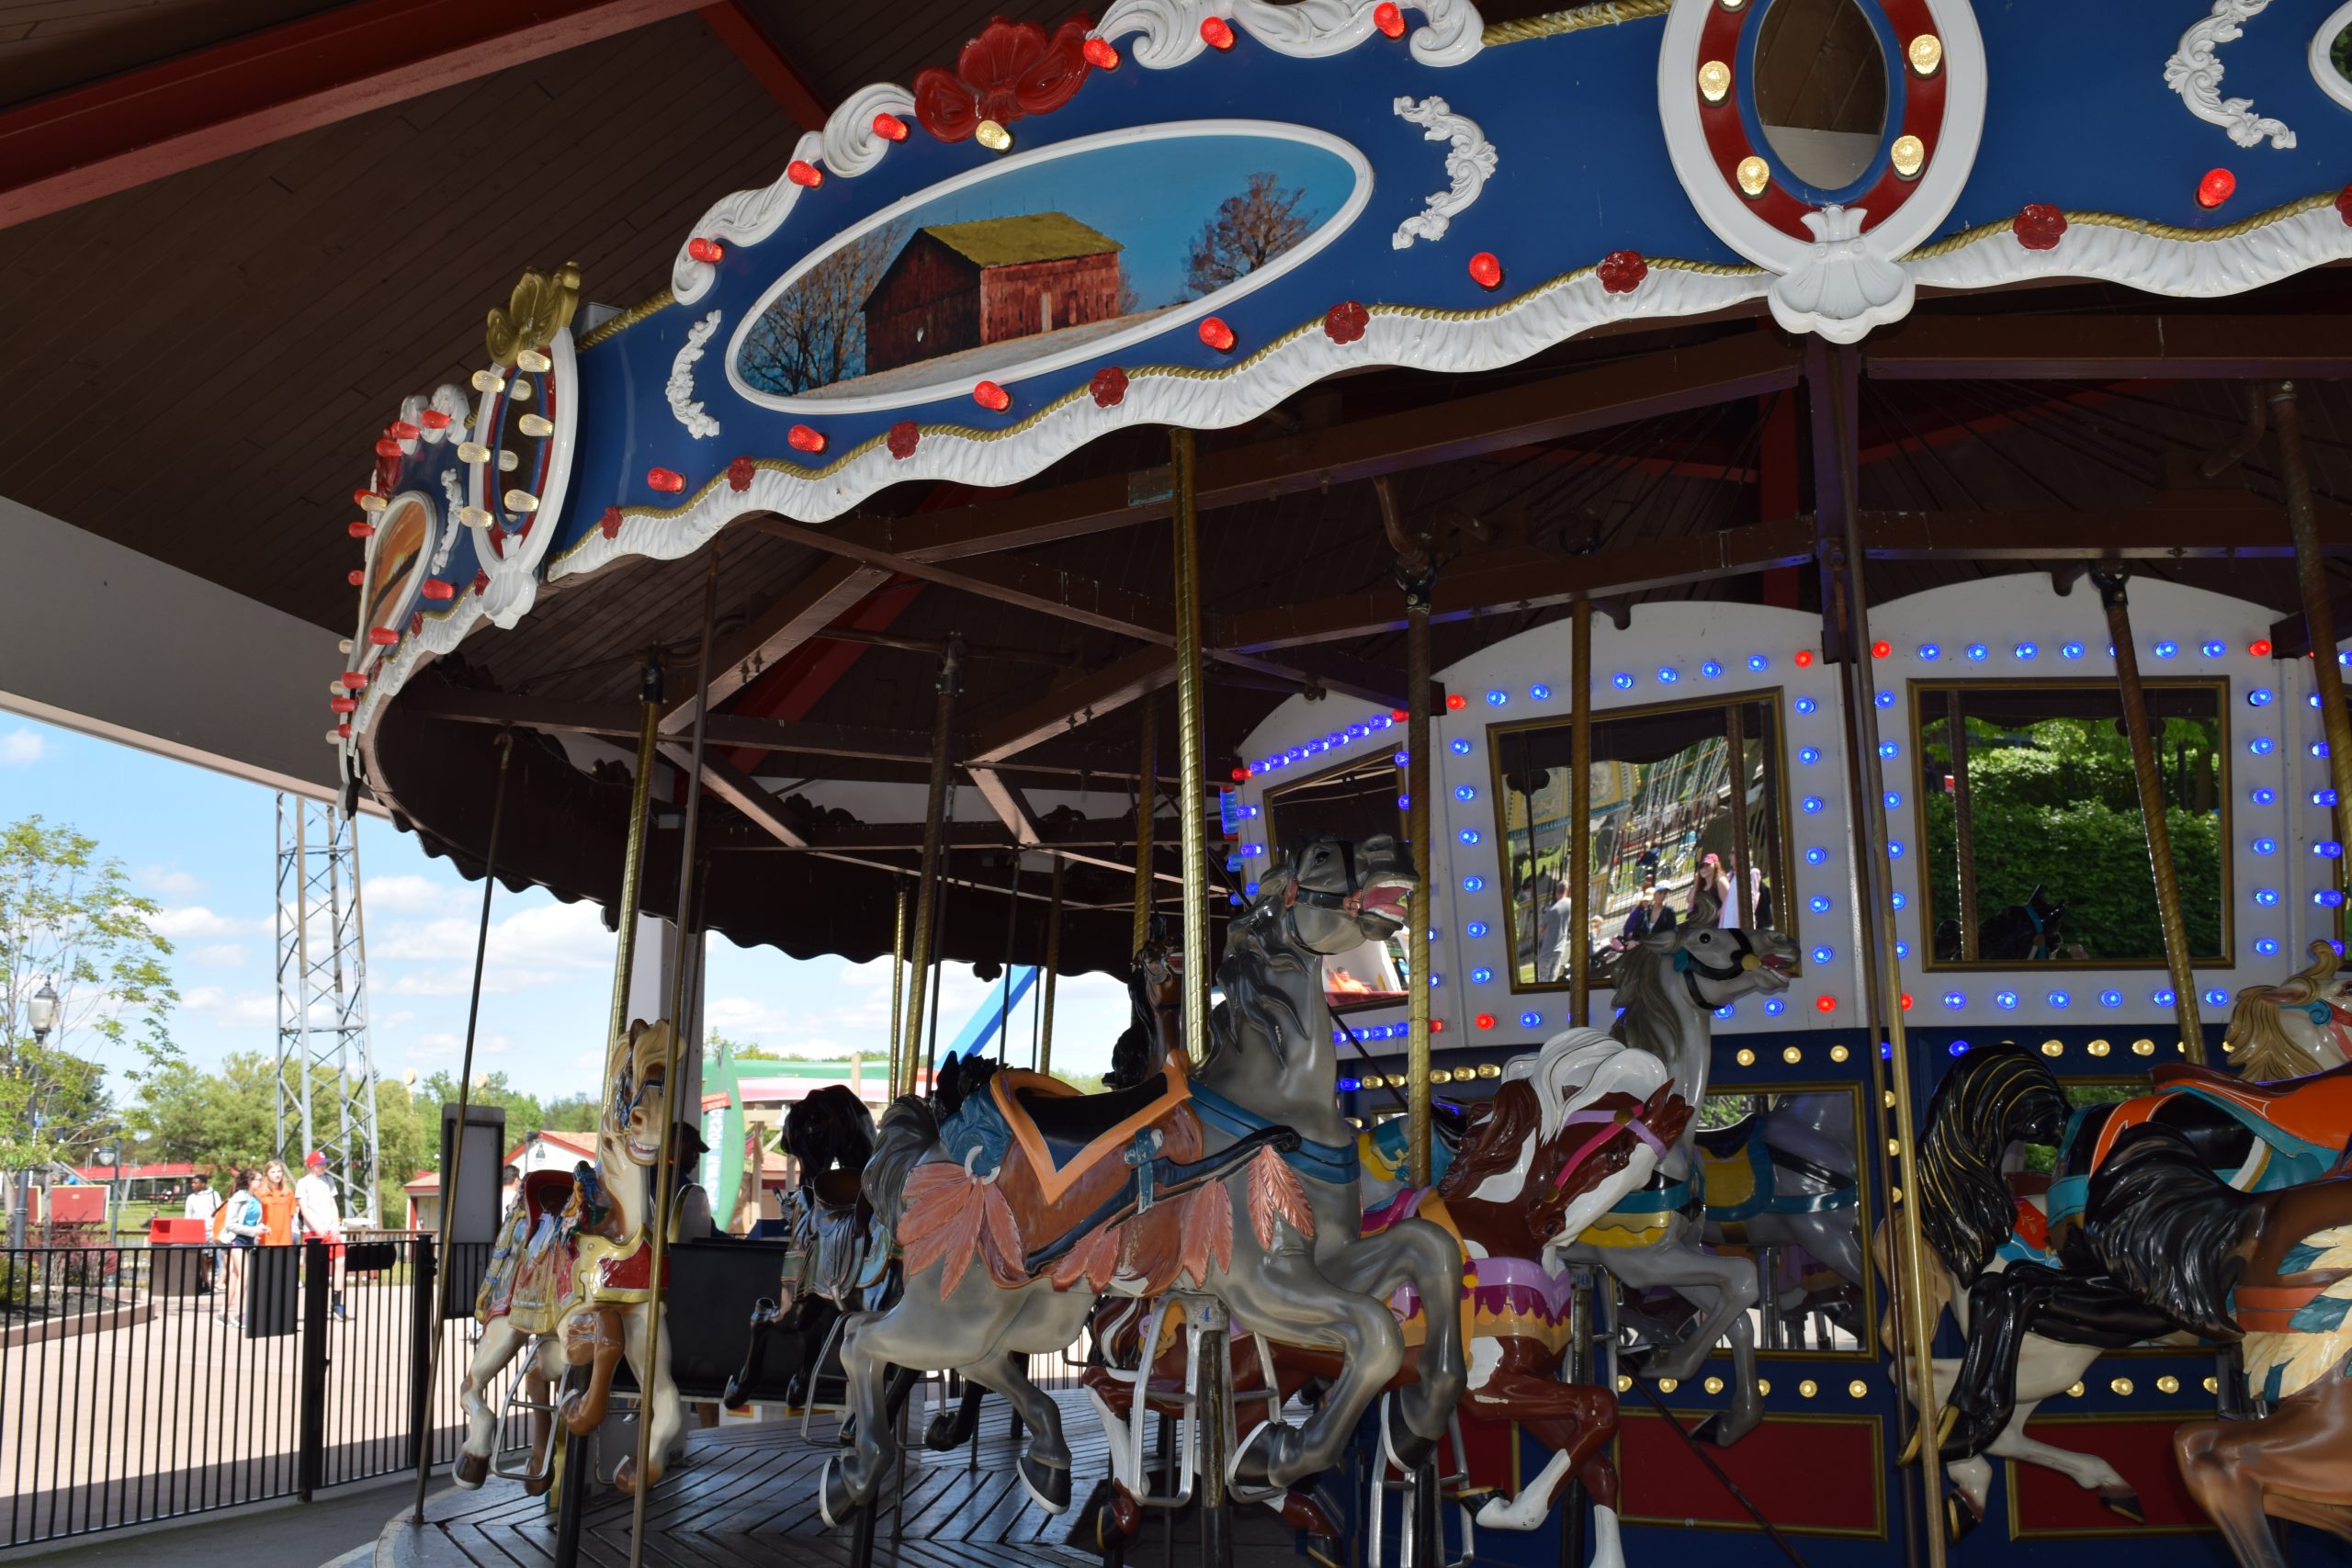 People smiling riding the carousel.